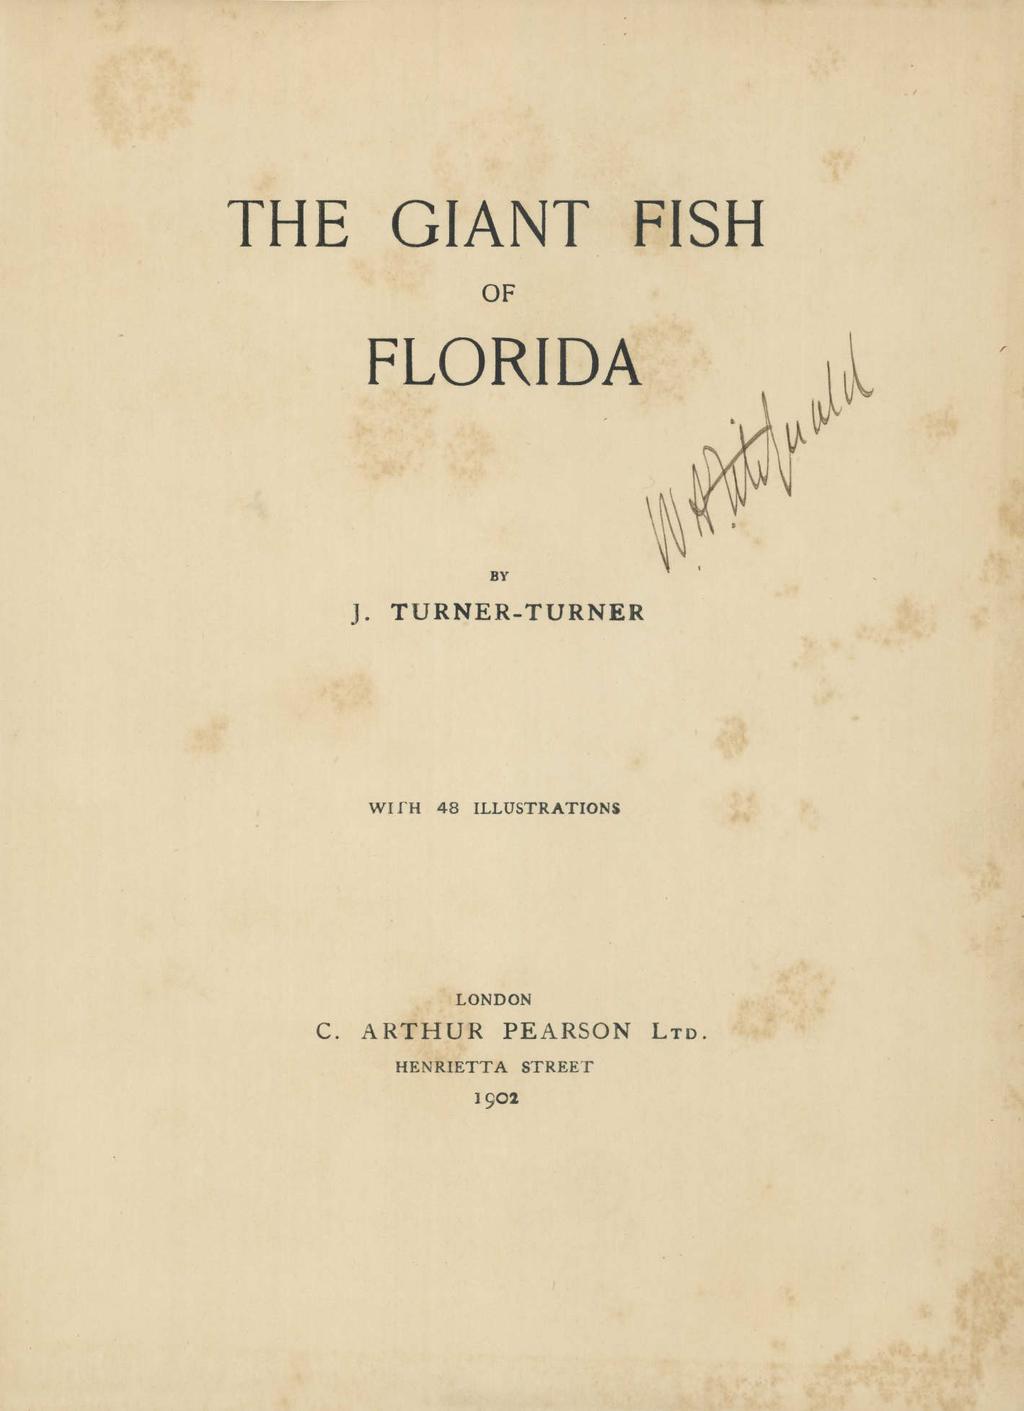 THE GIANT FISH OF FLORIDA BY ' J.